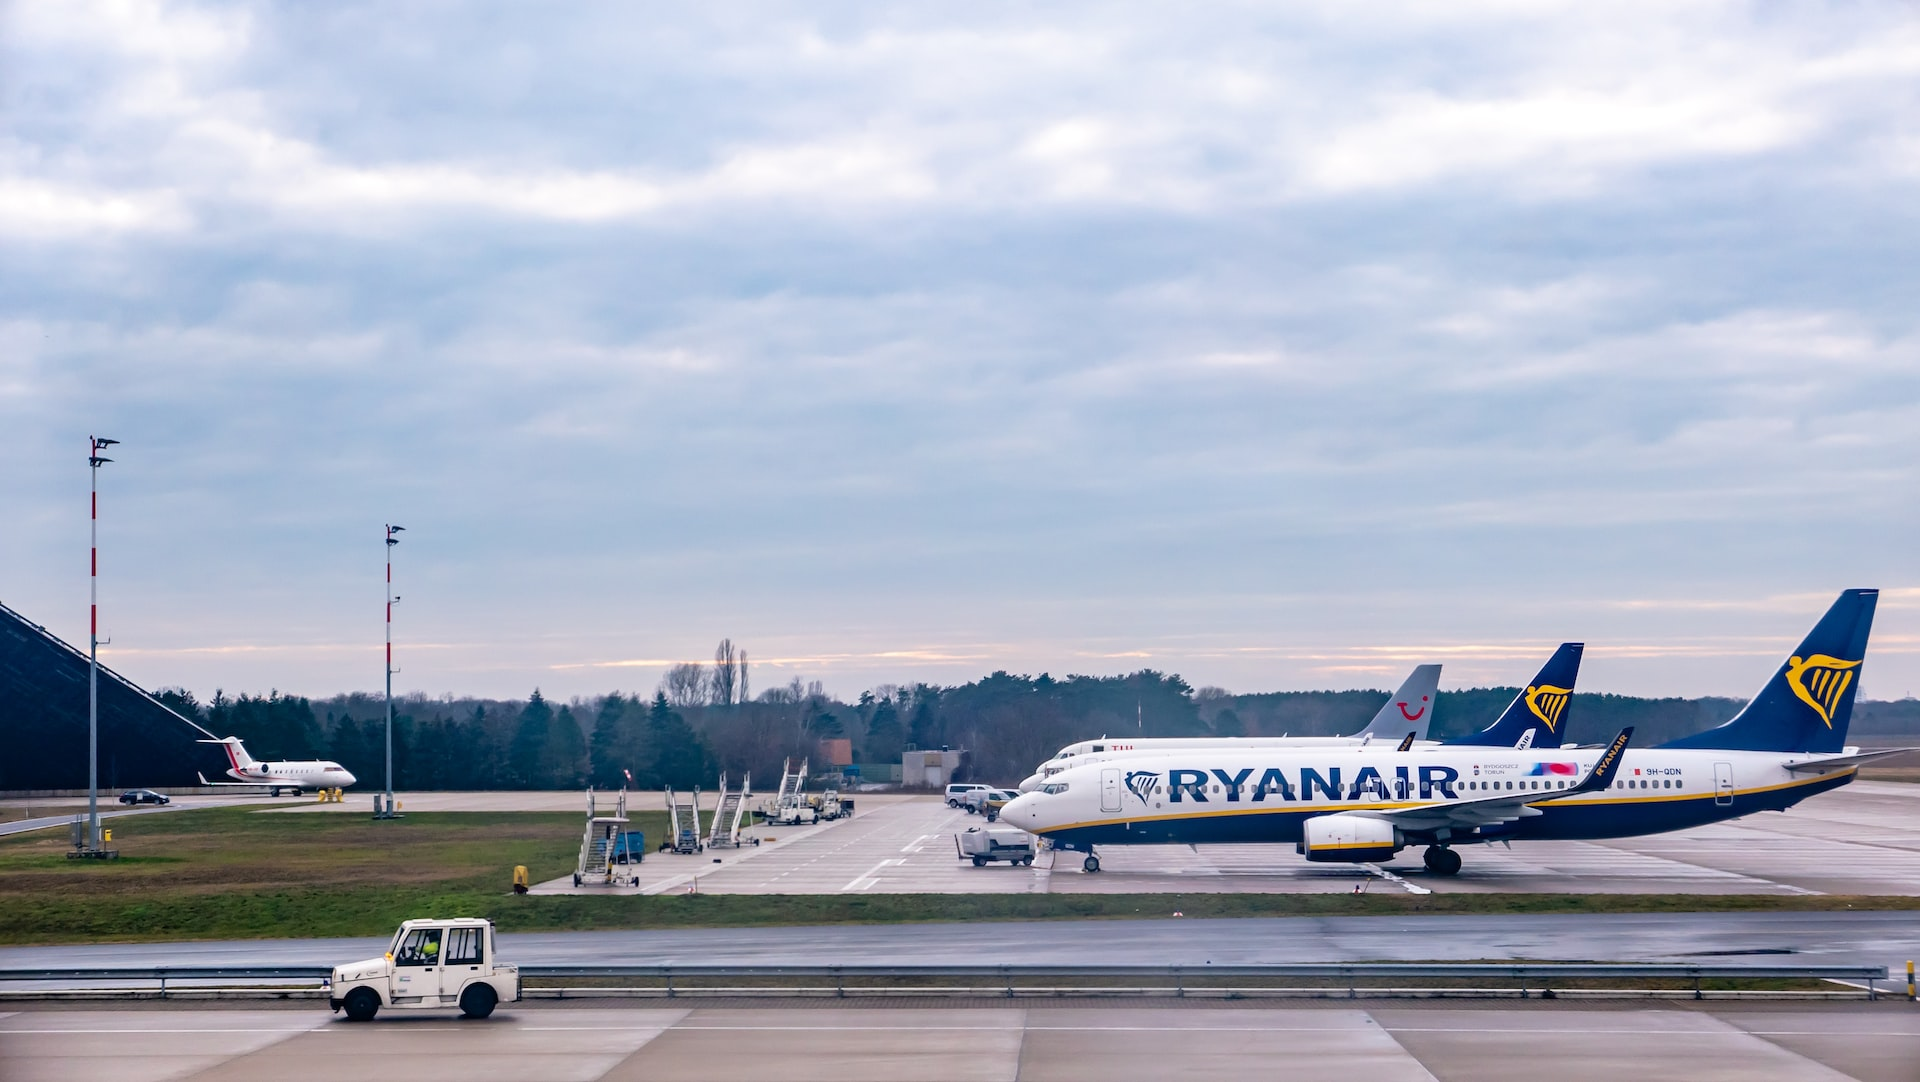 Ryanair aircraft stationed on tarmac at an airport.